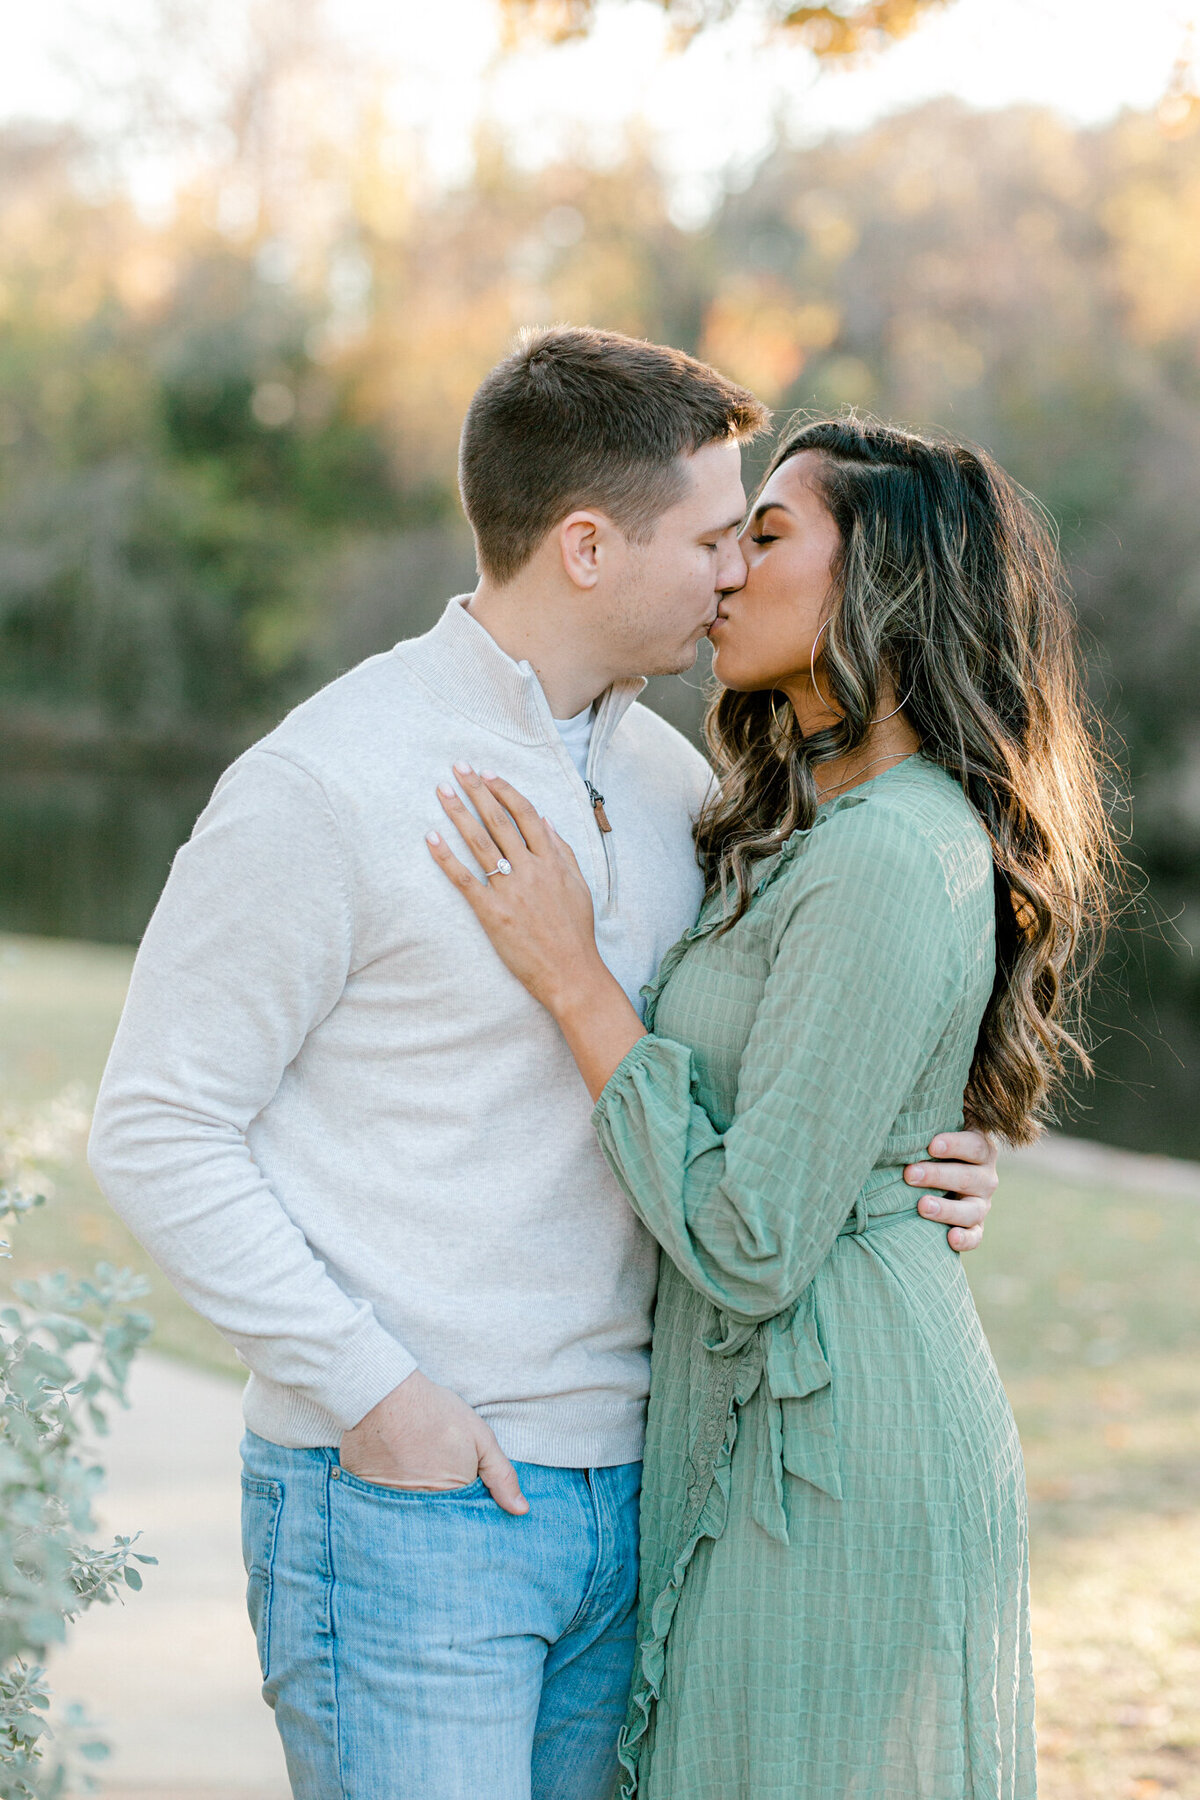 Jasmine & Hayden Engagement Session at Lakeside Park | Dallas Wedding and Portrait Photography | Sami Kathryn Photography-2